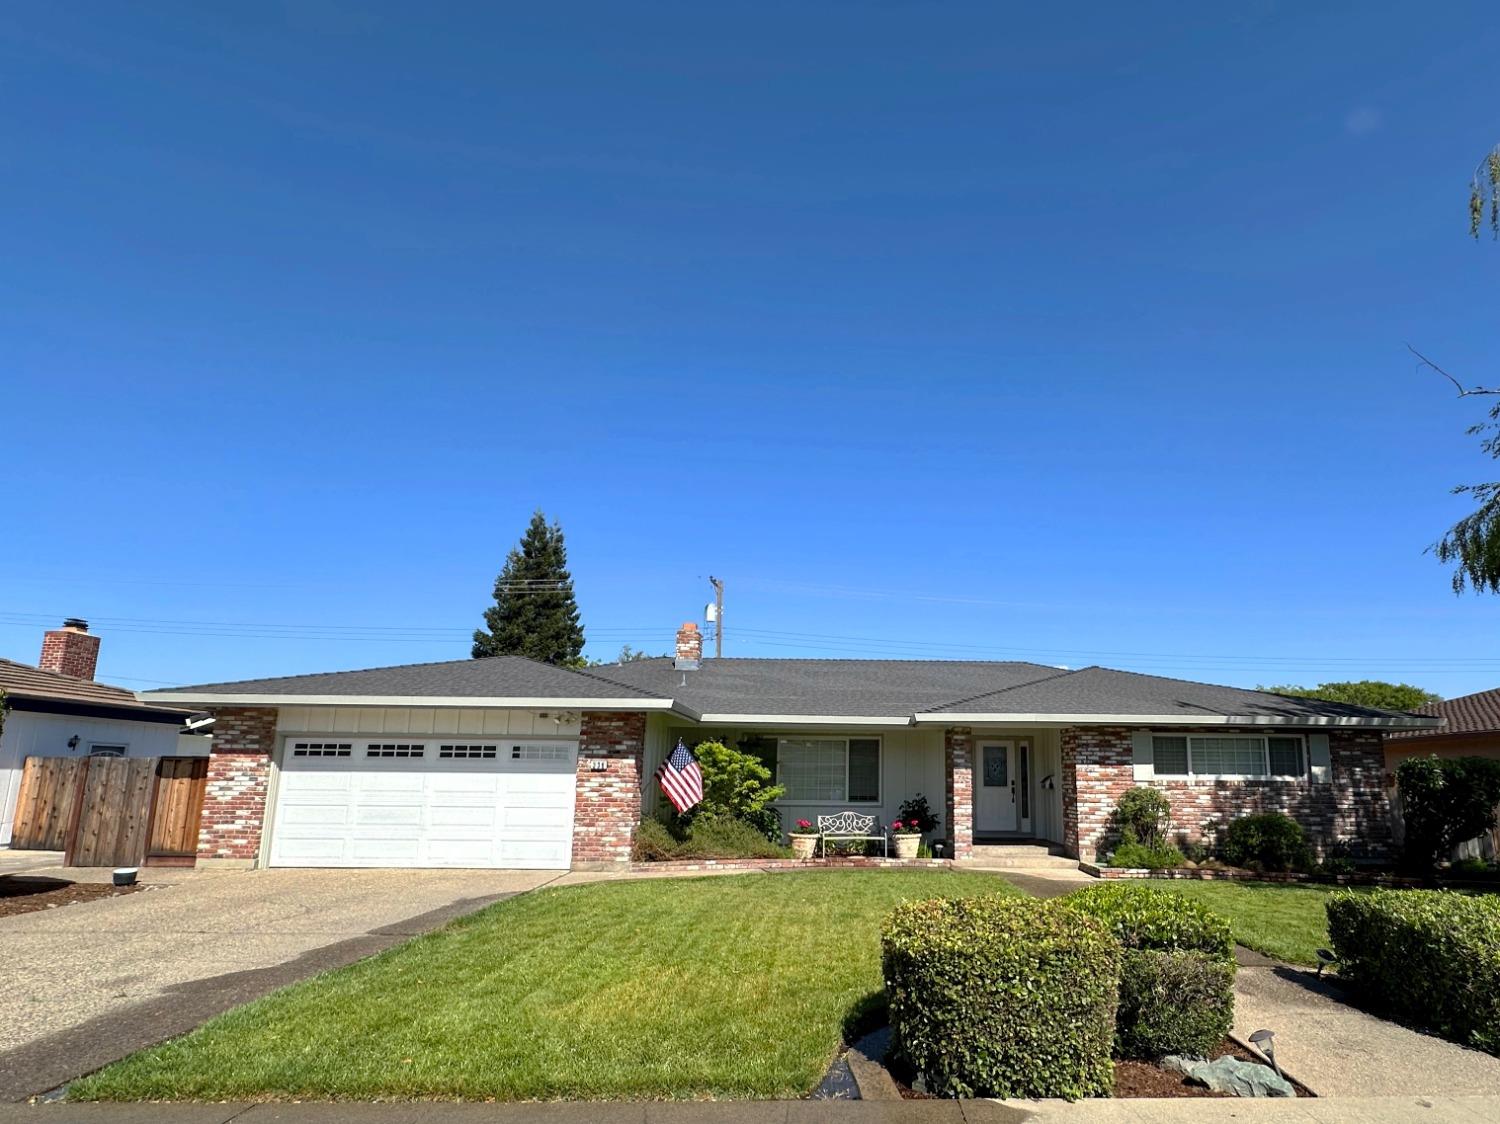 Photo of 336 Shady Acres Dr in Lodi, CA